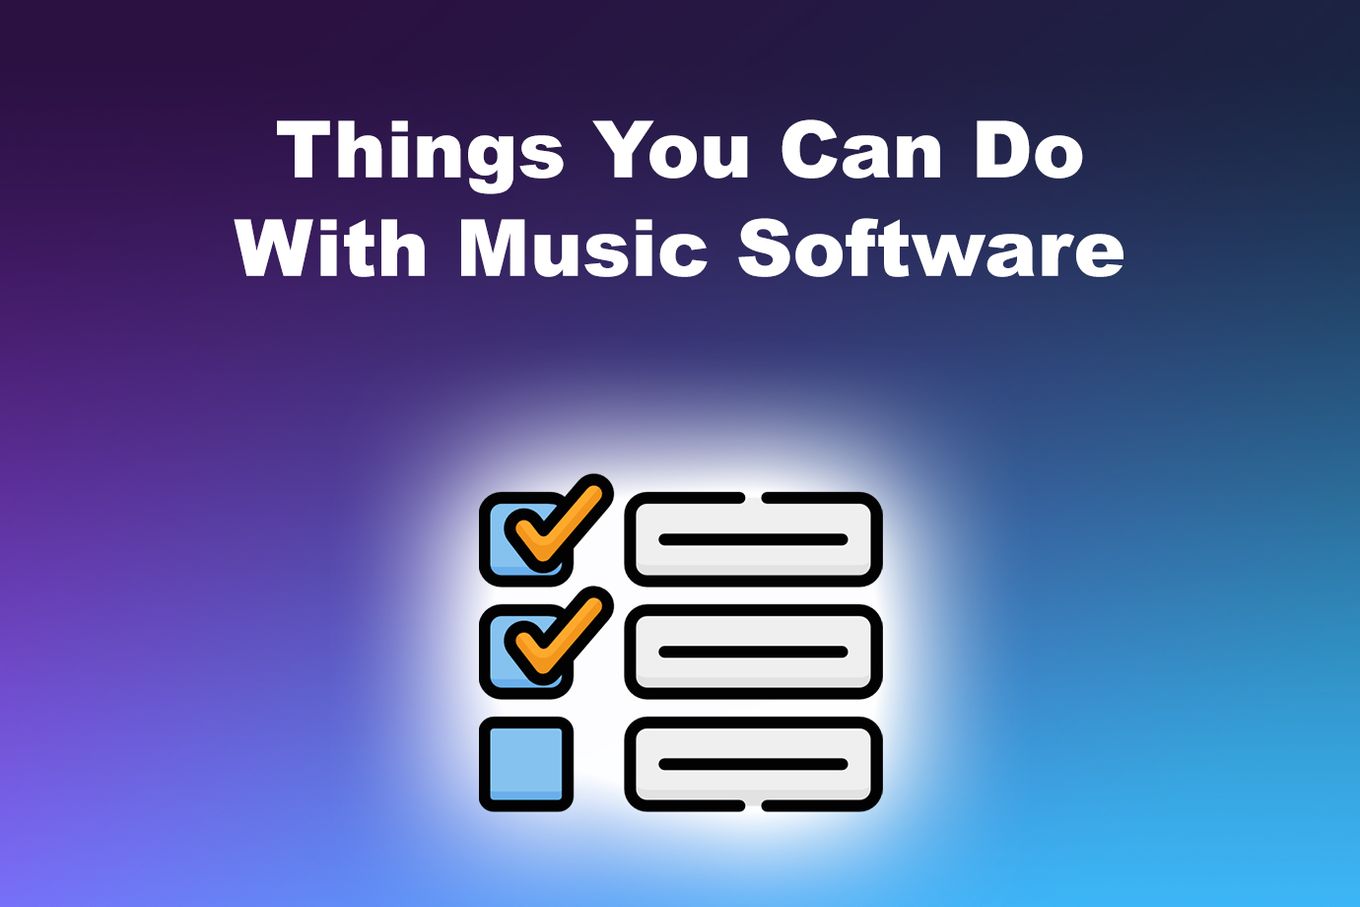 Things You Can Do With Music Software